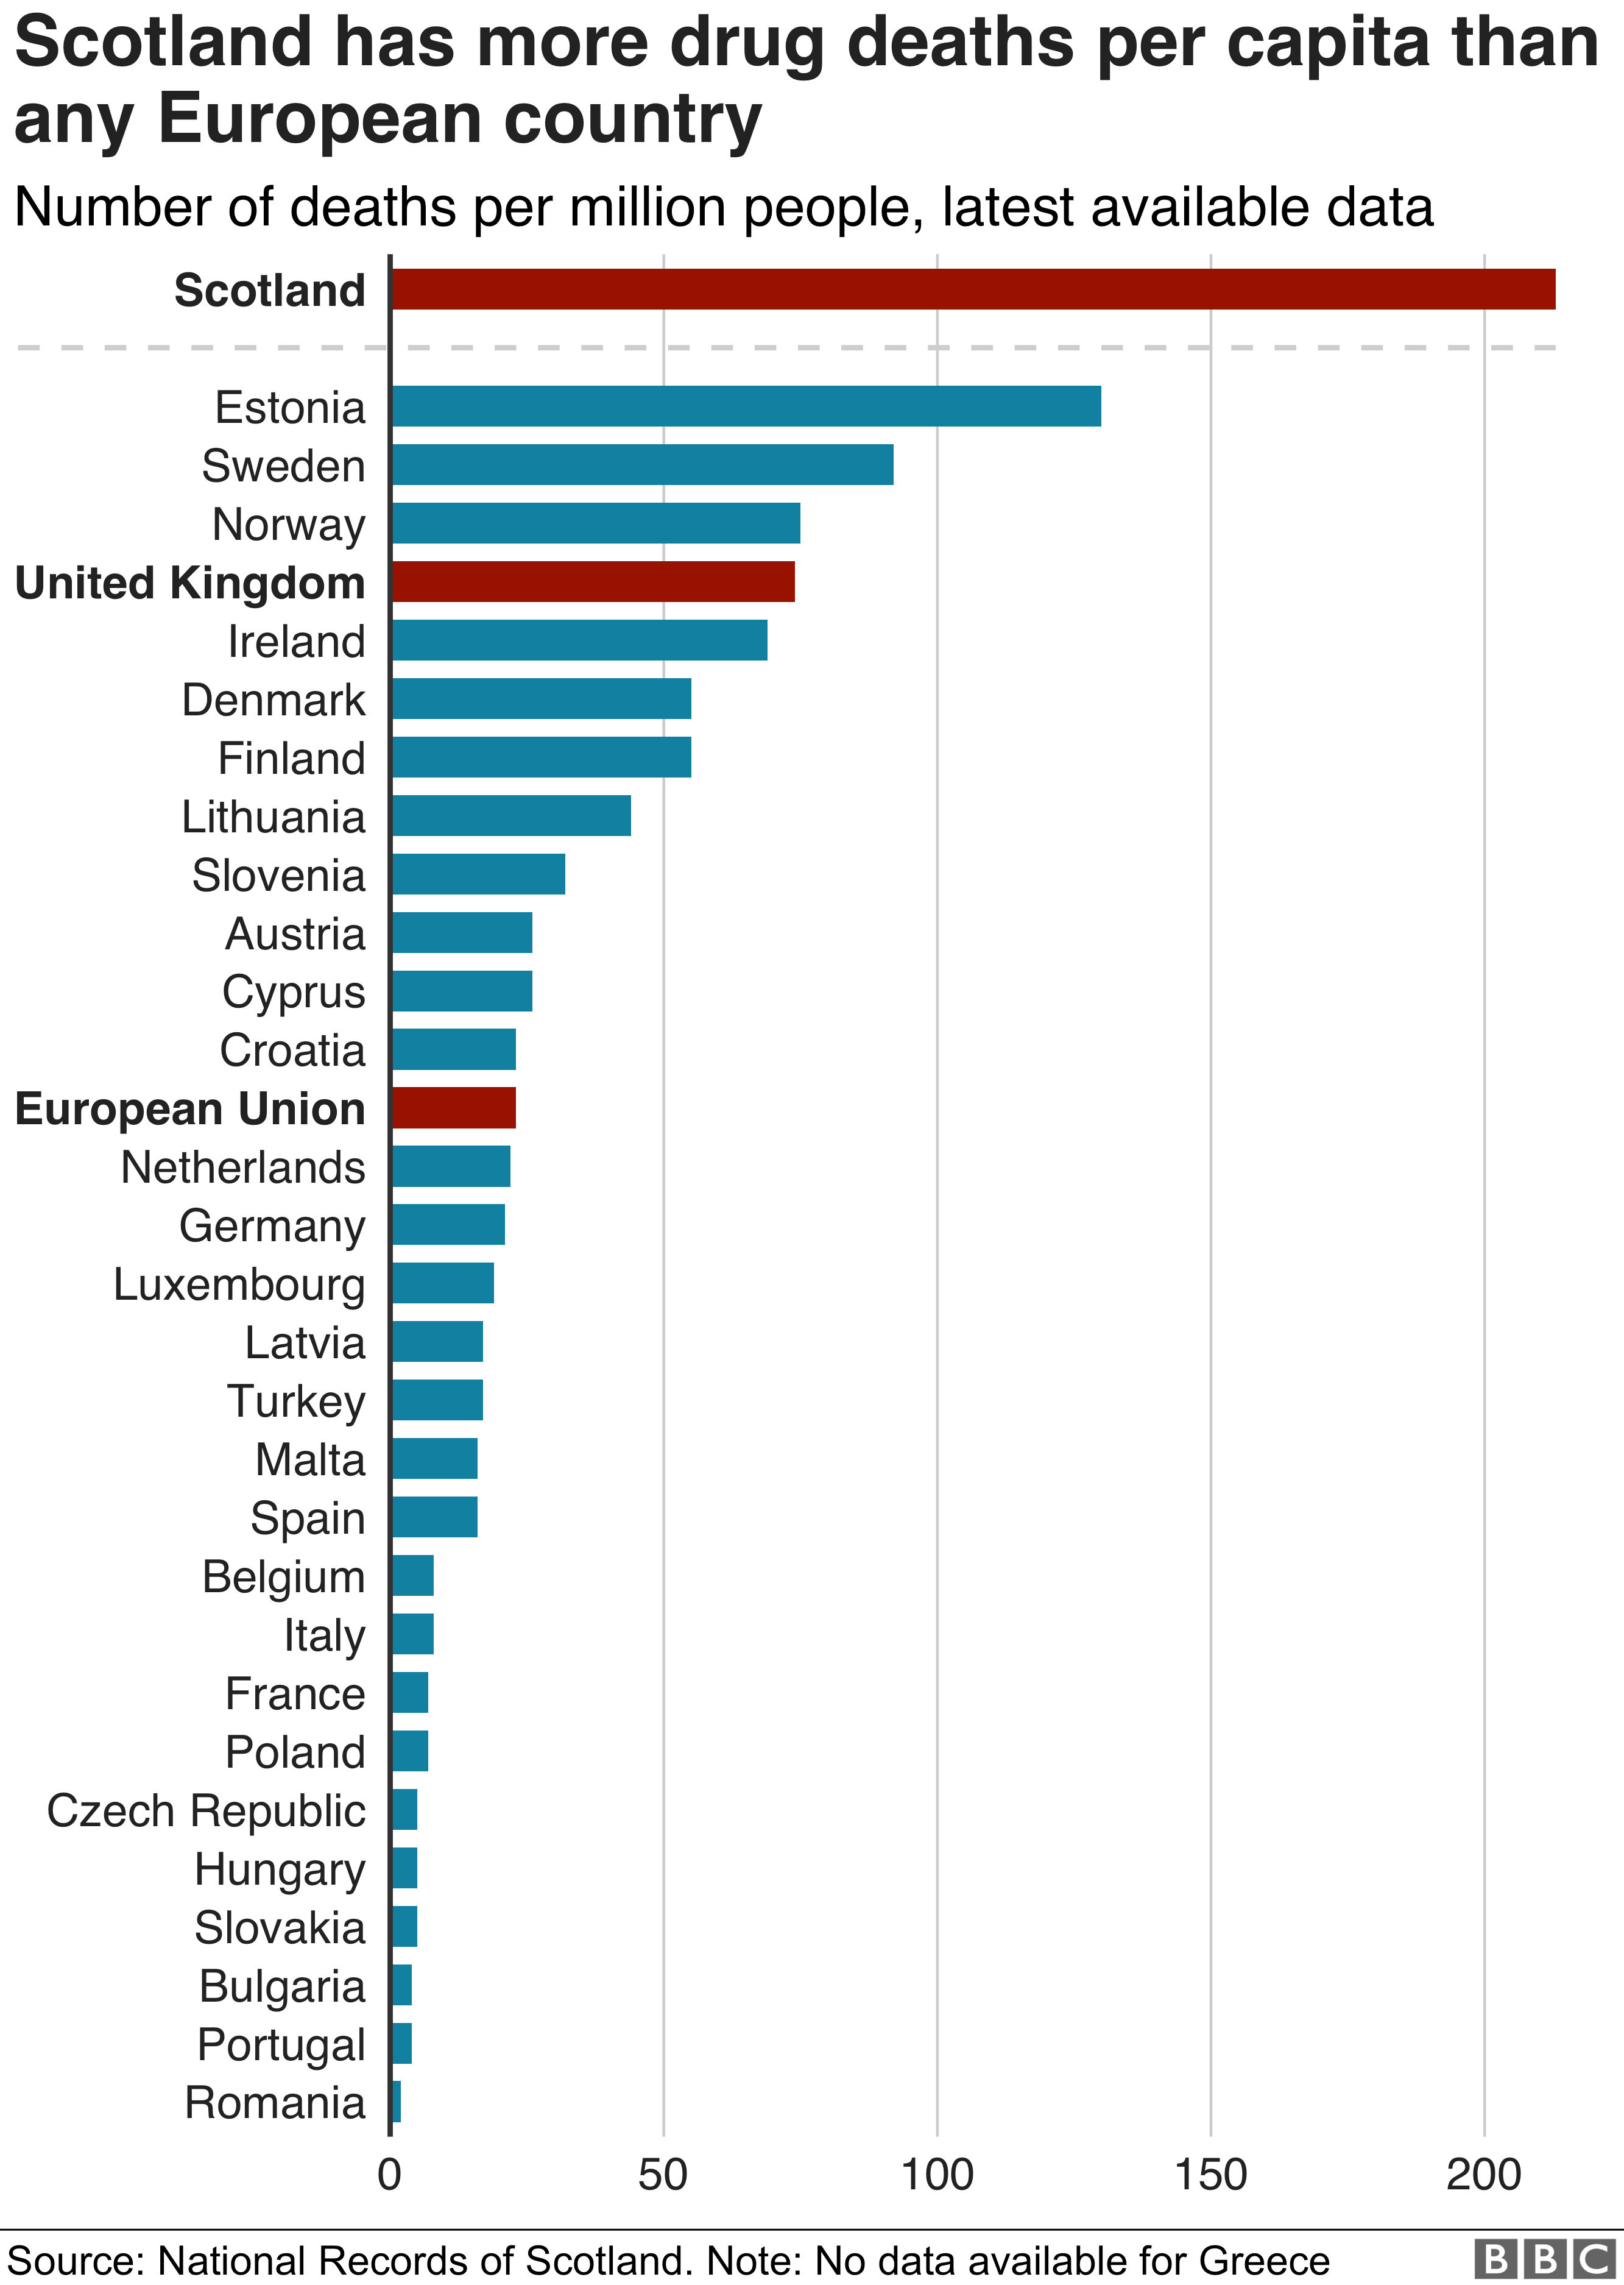 Scotland has more drug deaths per 1,000 people (213) than any other EU country. The EU average is 23